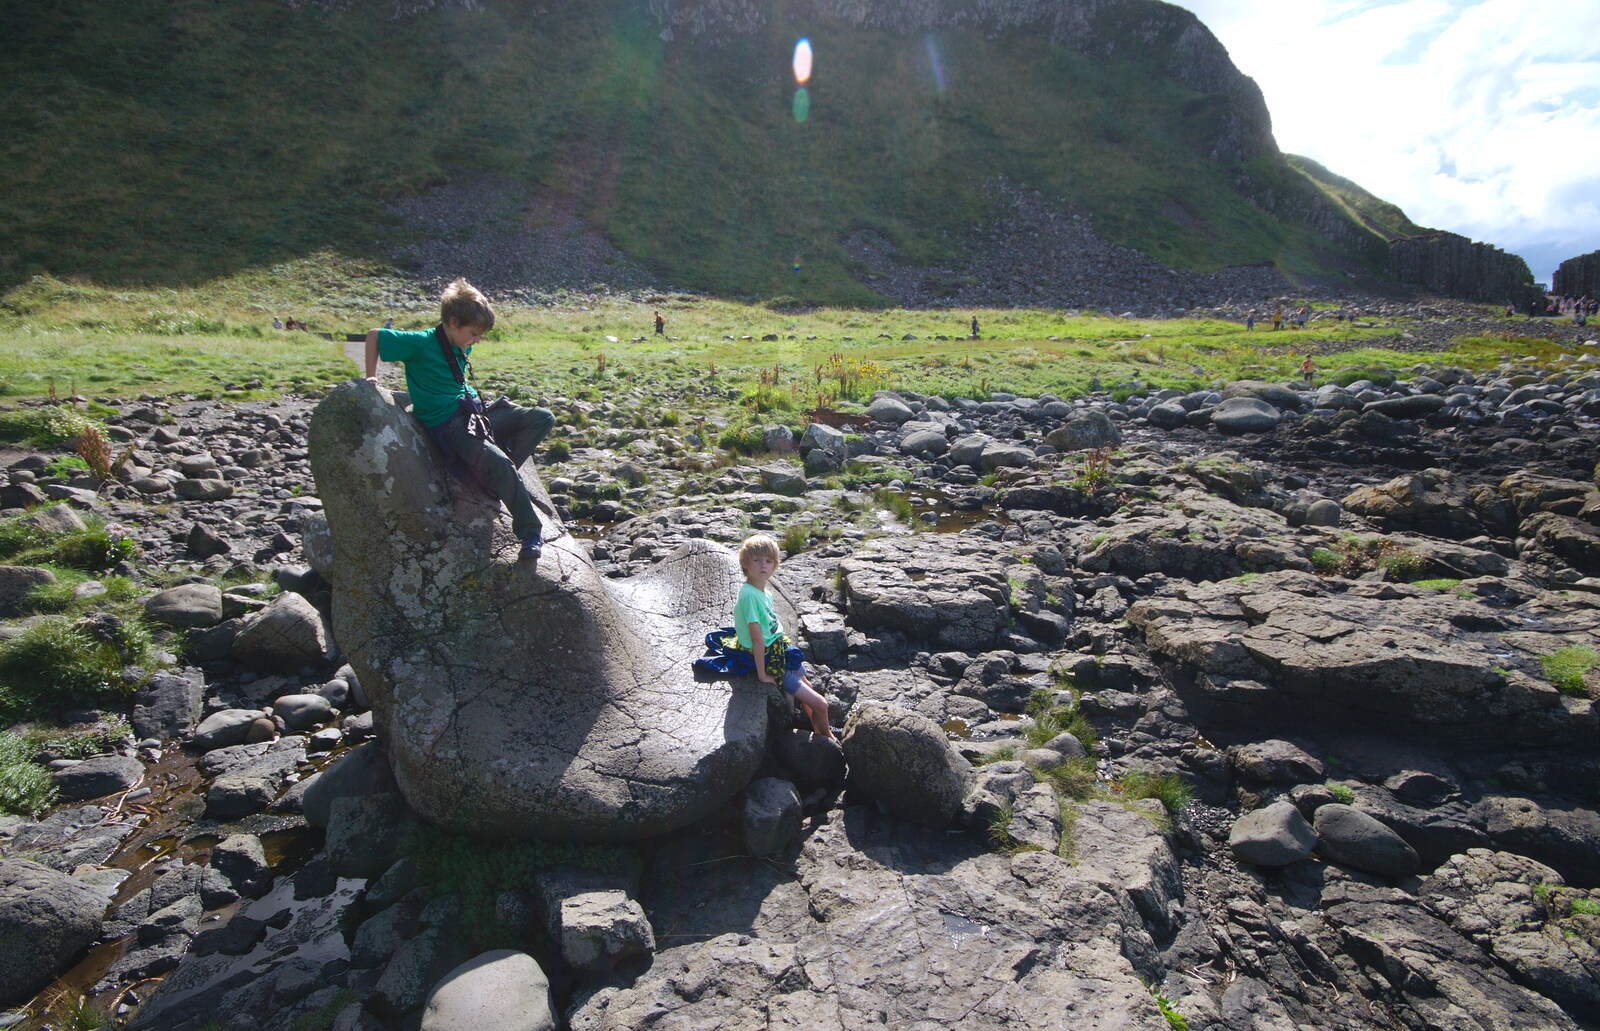 The boys on the giant's shoe from The Giant's Causeway, Bushmills, County Antrim, Northern Ireland - 14th August 2019